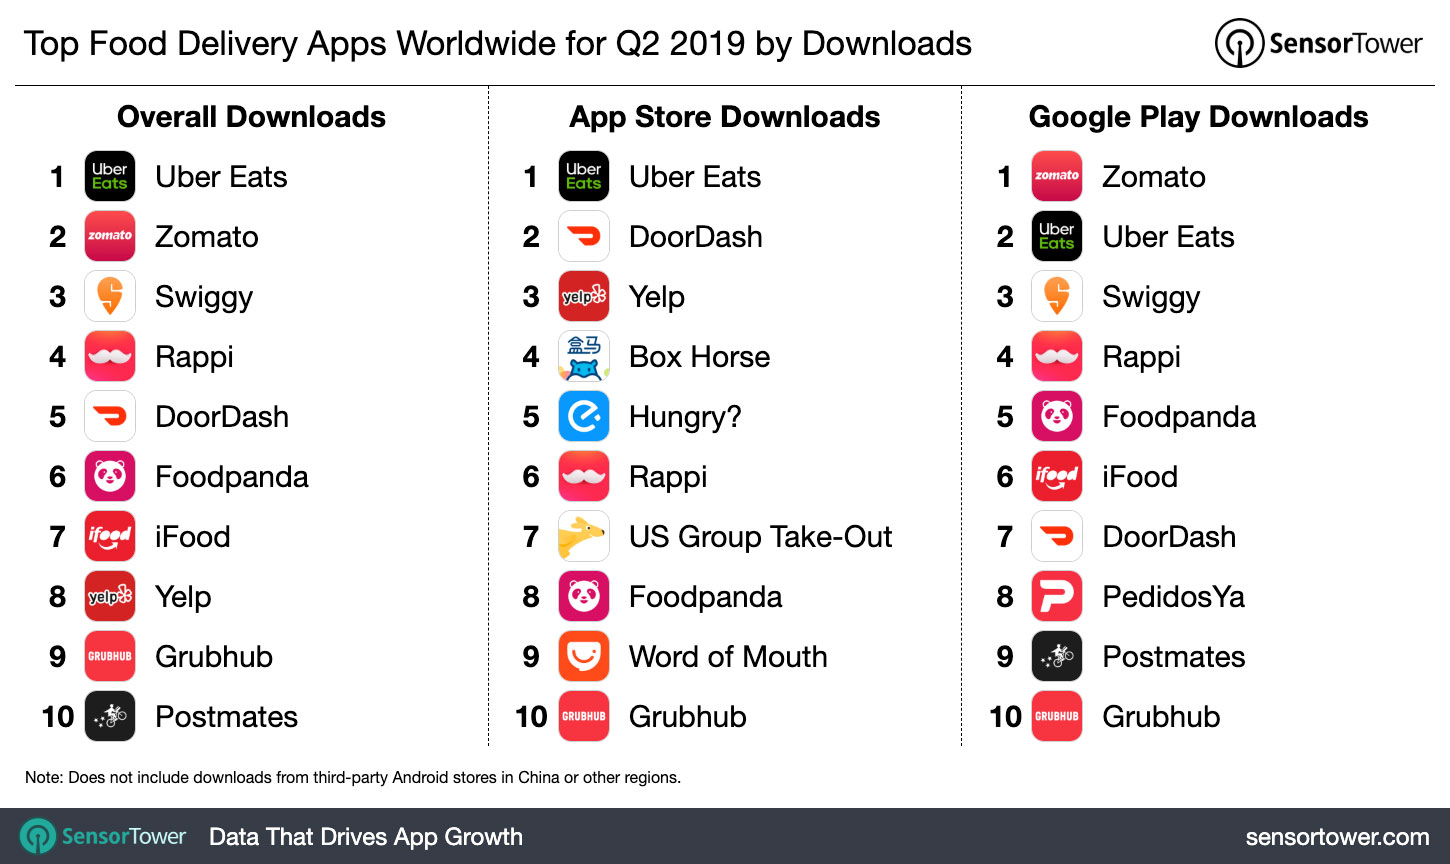 Top Food Delivery Apps Worldwide for Q2 2019 by Downloads